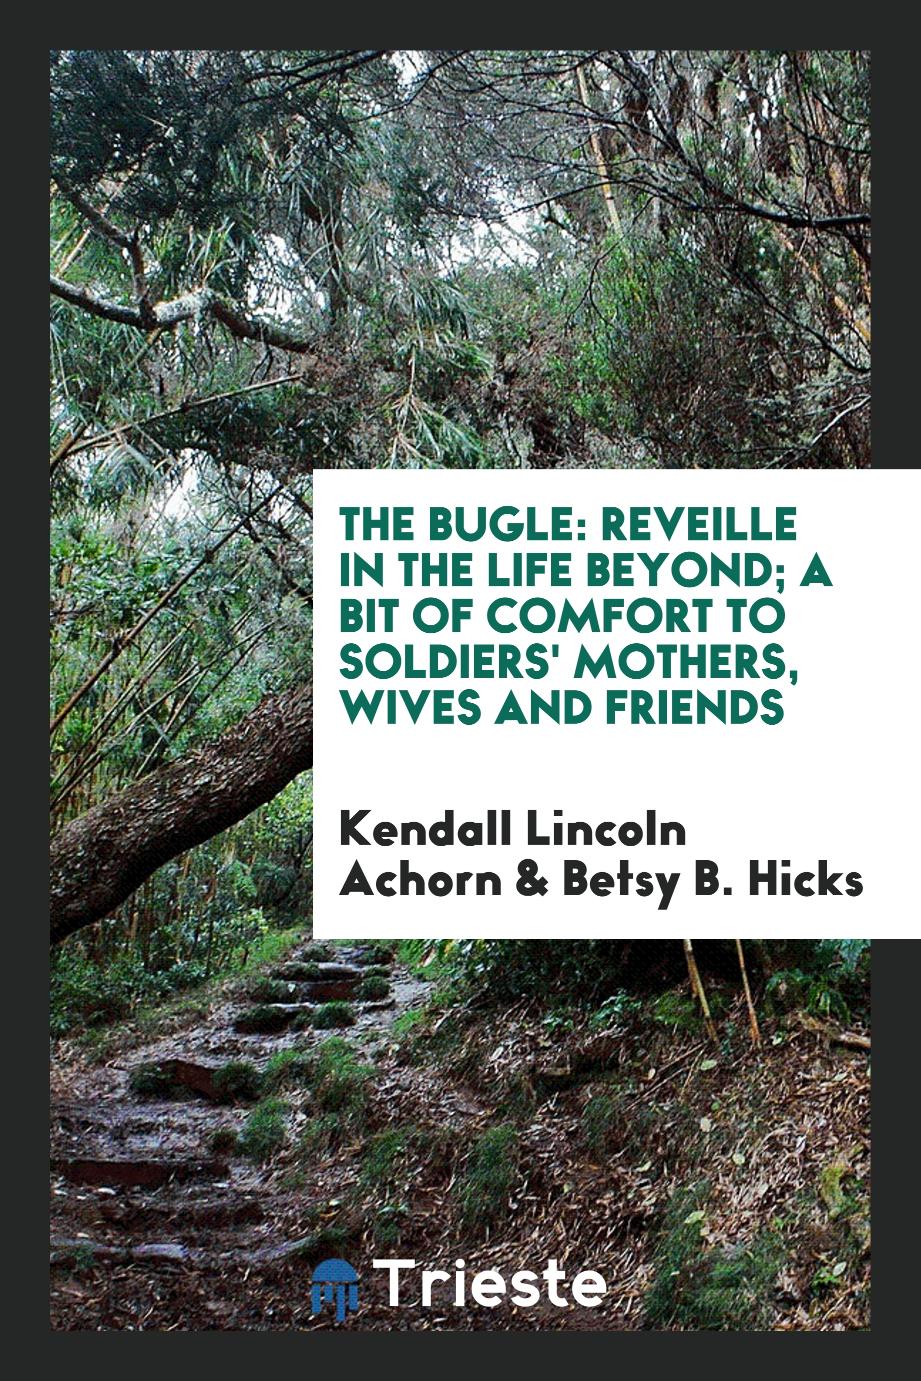 The Bugle: Reveille in the Life Beyond; A Bit of Comfort to Soldiers' Mothers, Wives and Friends